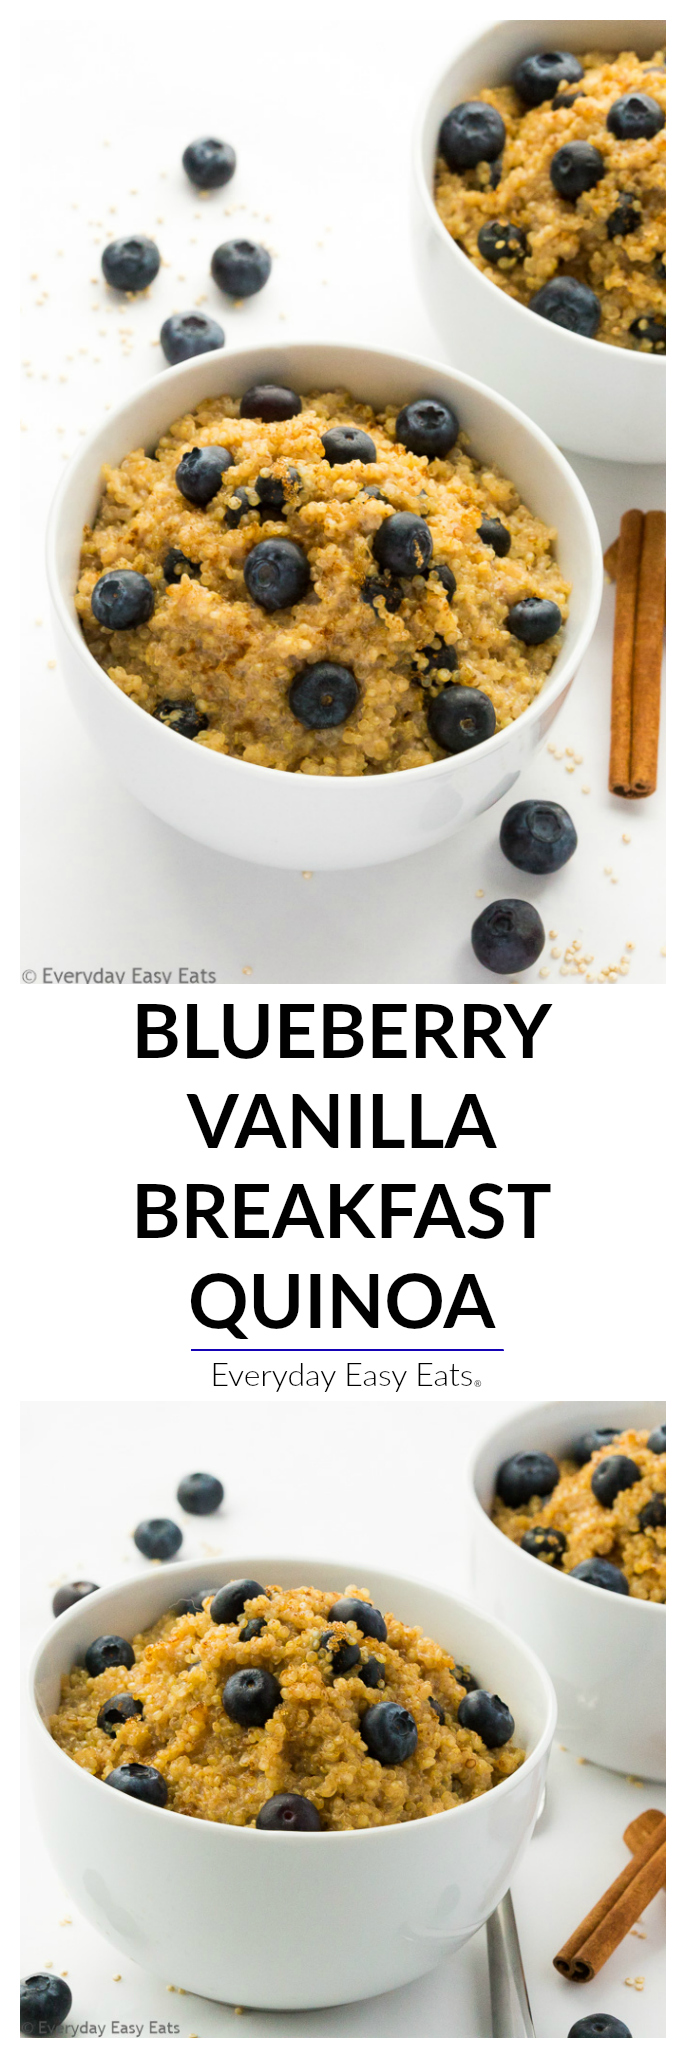 This easy Blueberry Vanilla Breakfast Quinoa is high in protein and gluten-free! | Recipe at EverydayEasyEats.com